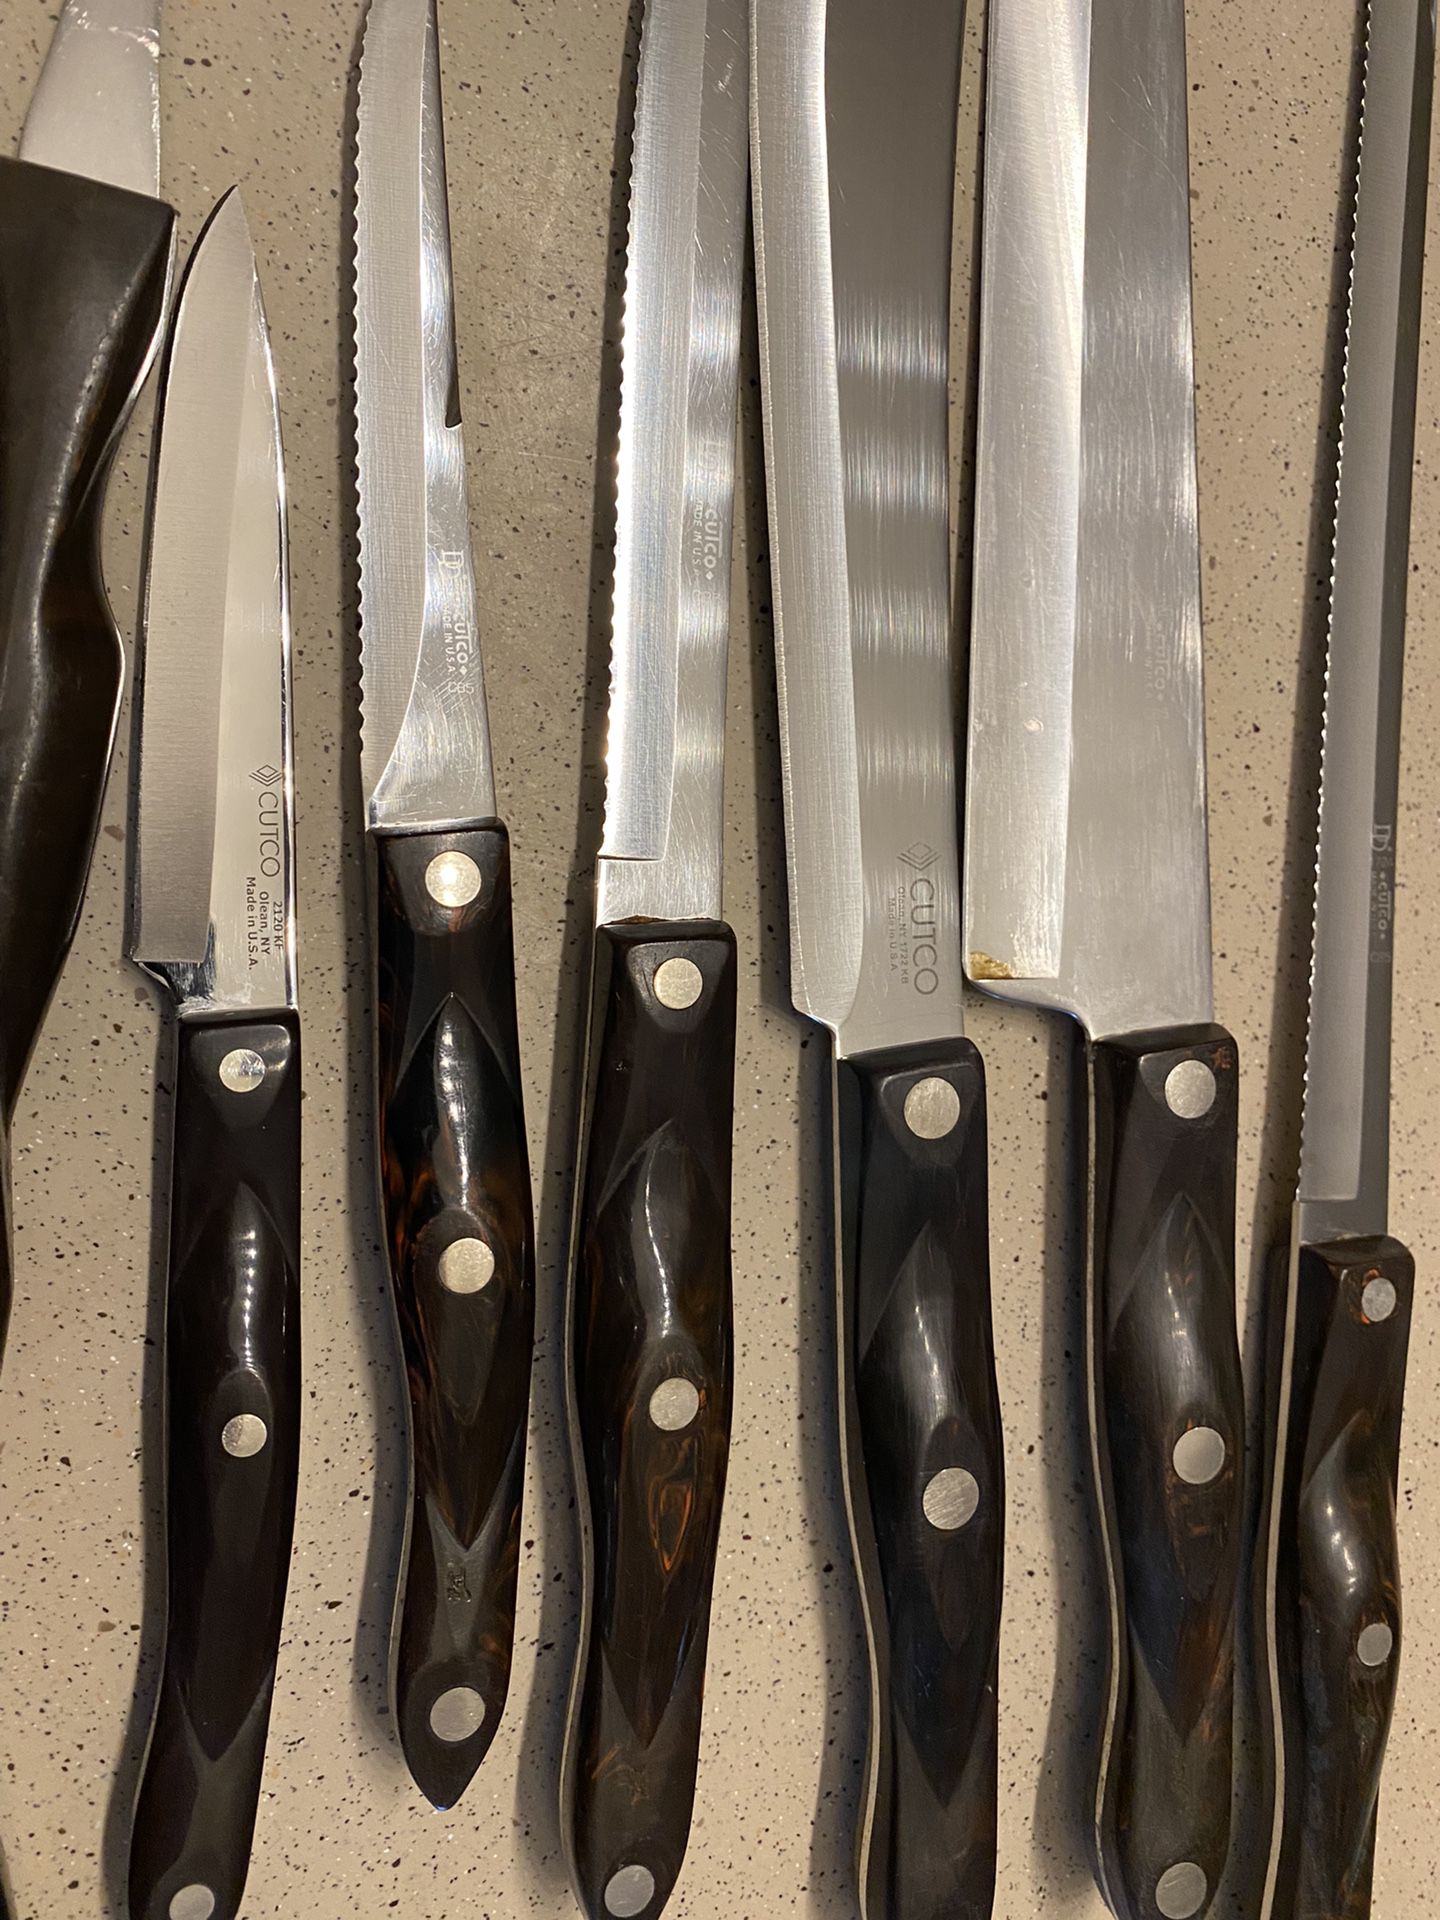 Cutco #1725 French Chef Knife for Sale in Tacoma, WA - OfferUp